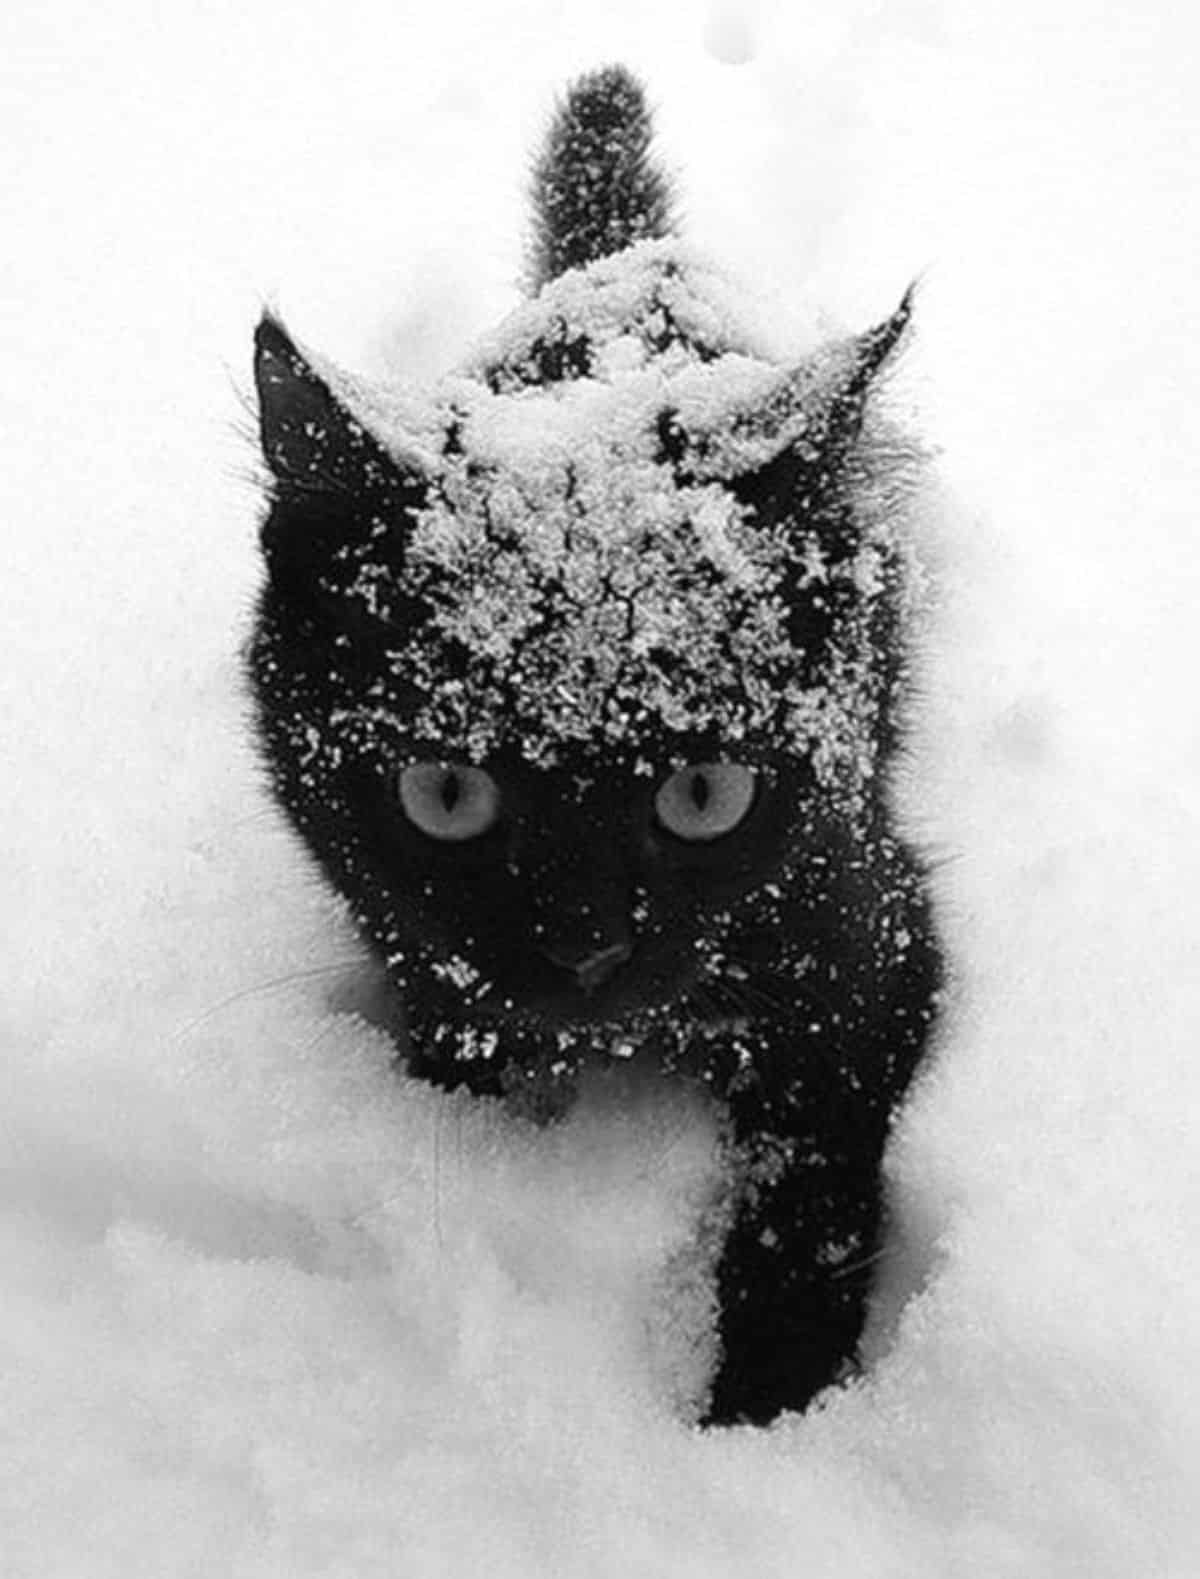 A beautiful black maine coon kitten walking in the snow.